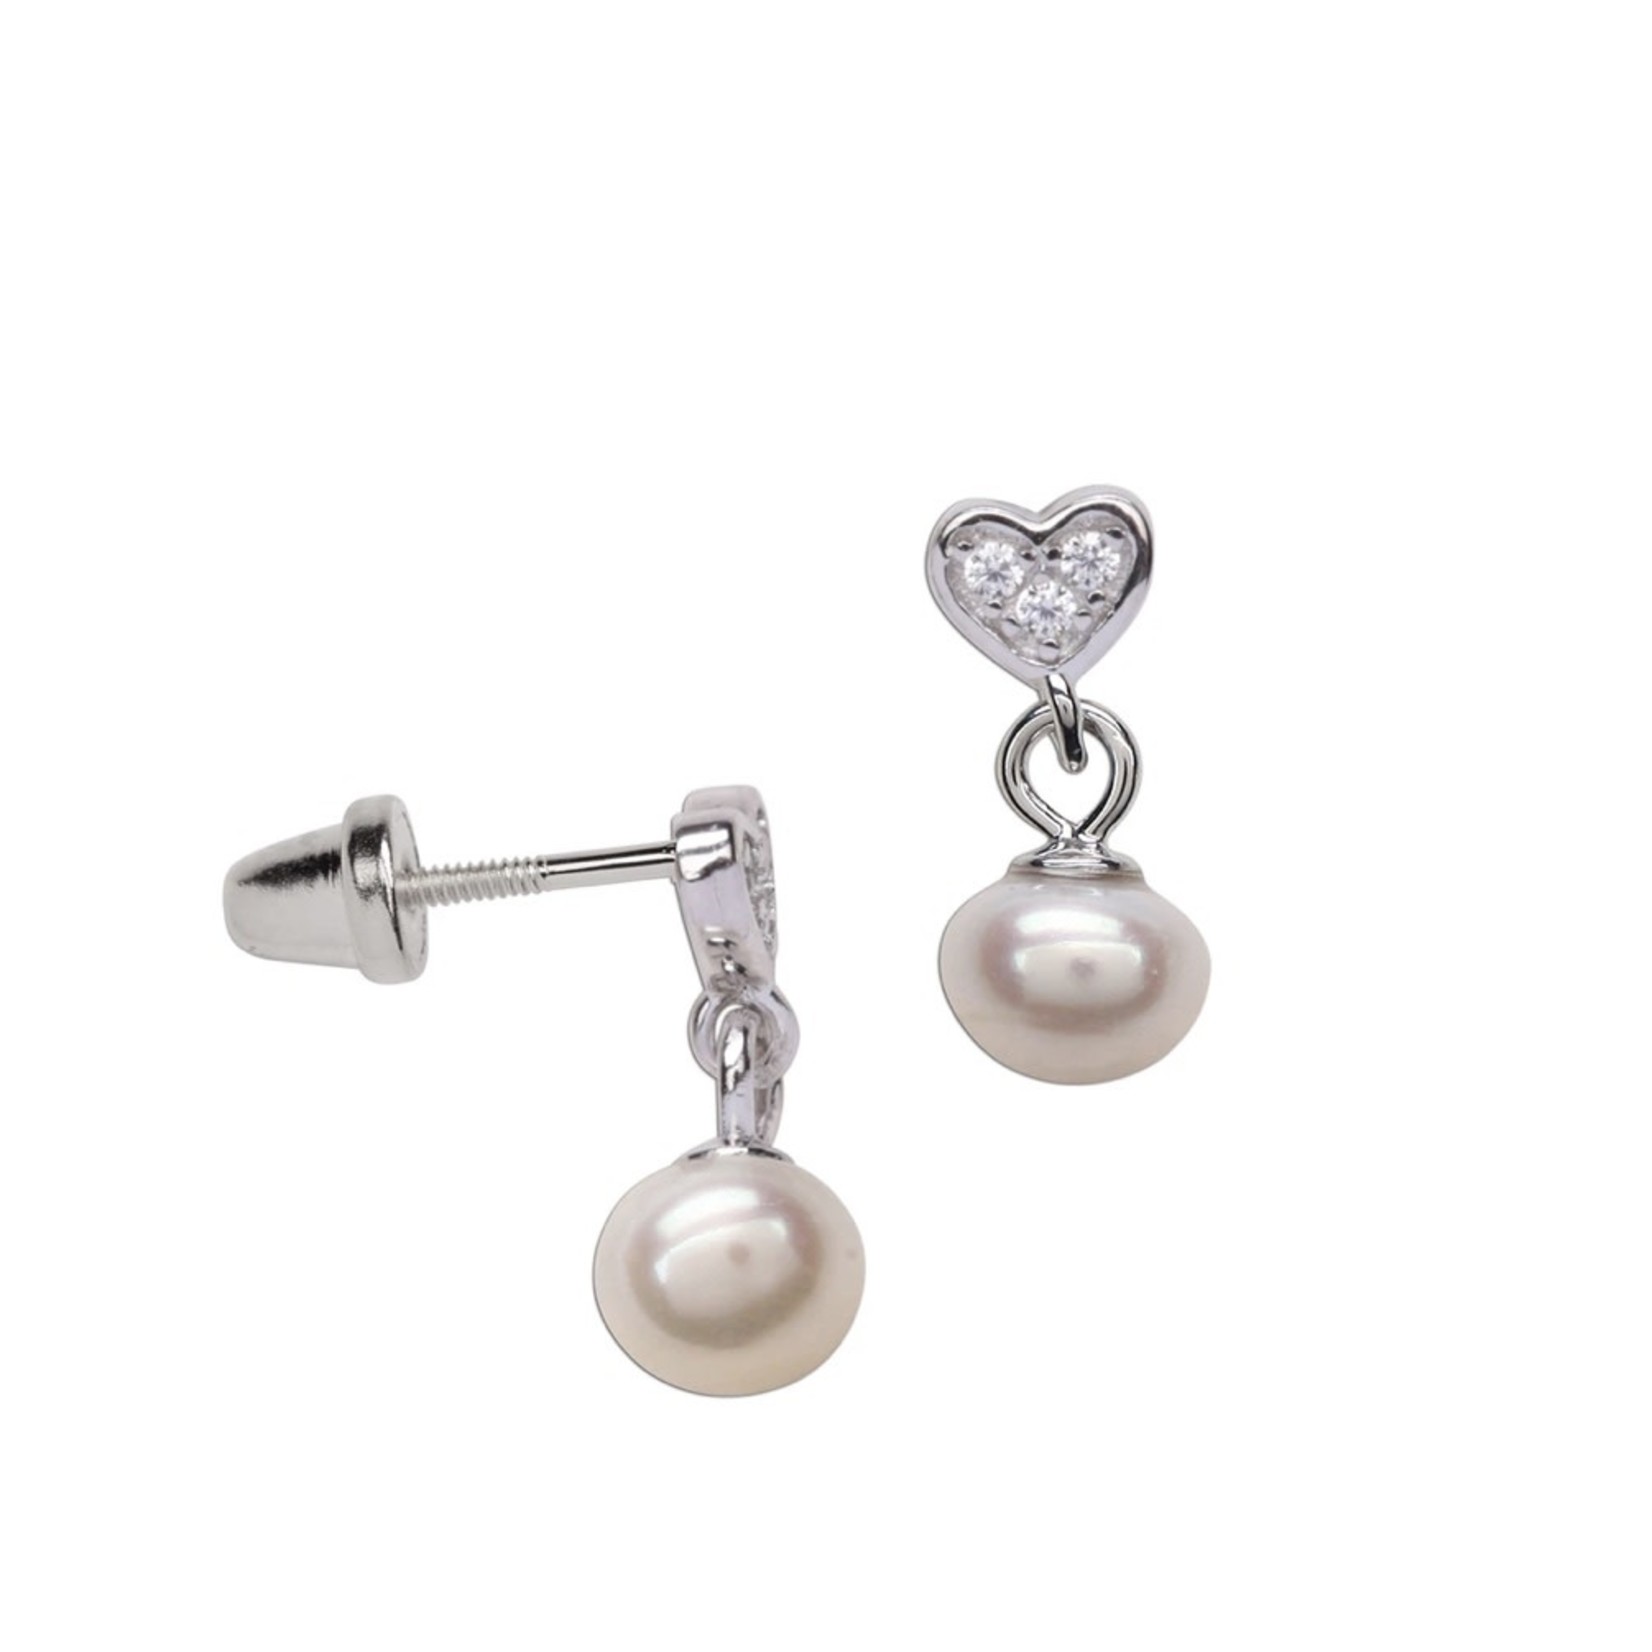 Cherished Moments Cherished Moments - Sterling Silver Earrings - Pearl